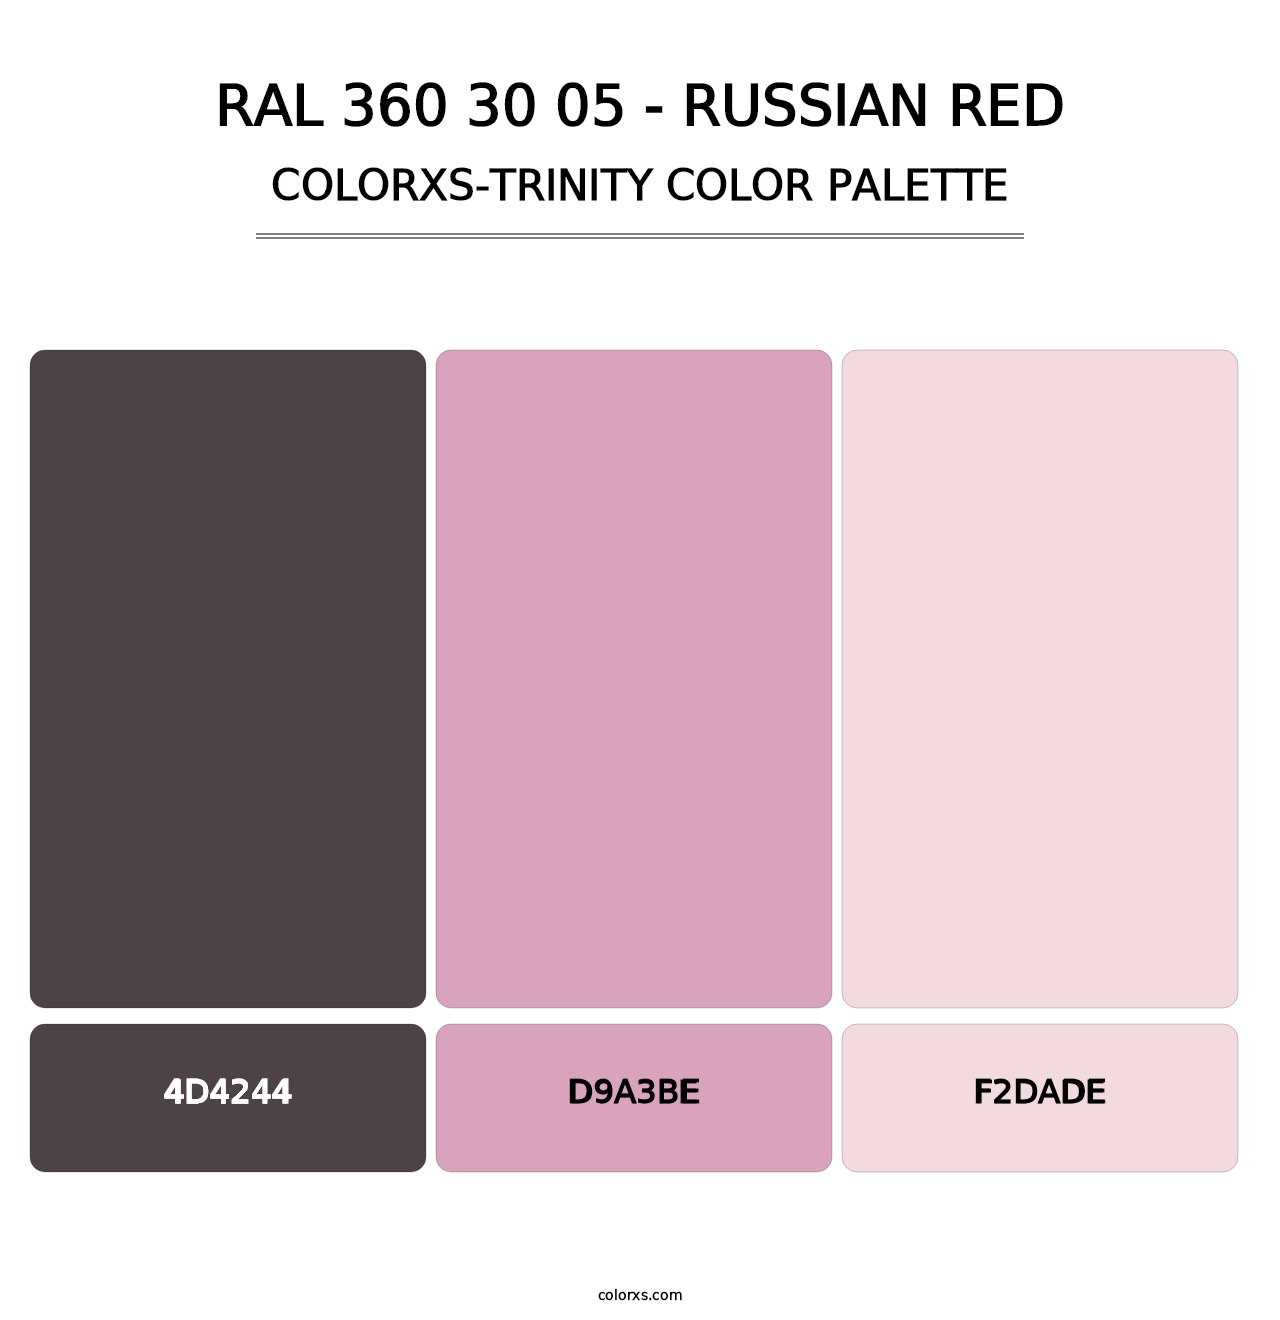 RAL 360 30 05 - Russian Red - Colorxs Trinity Palette